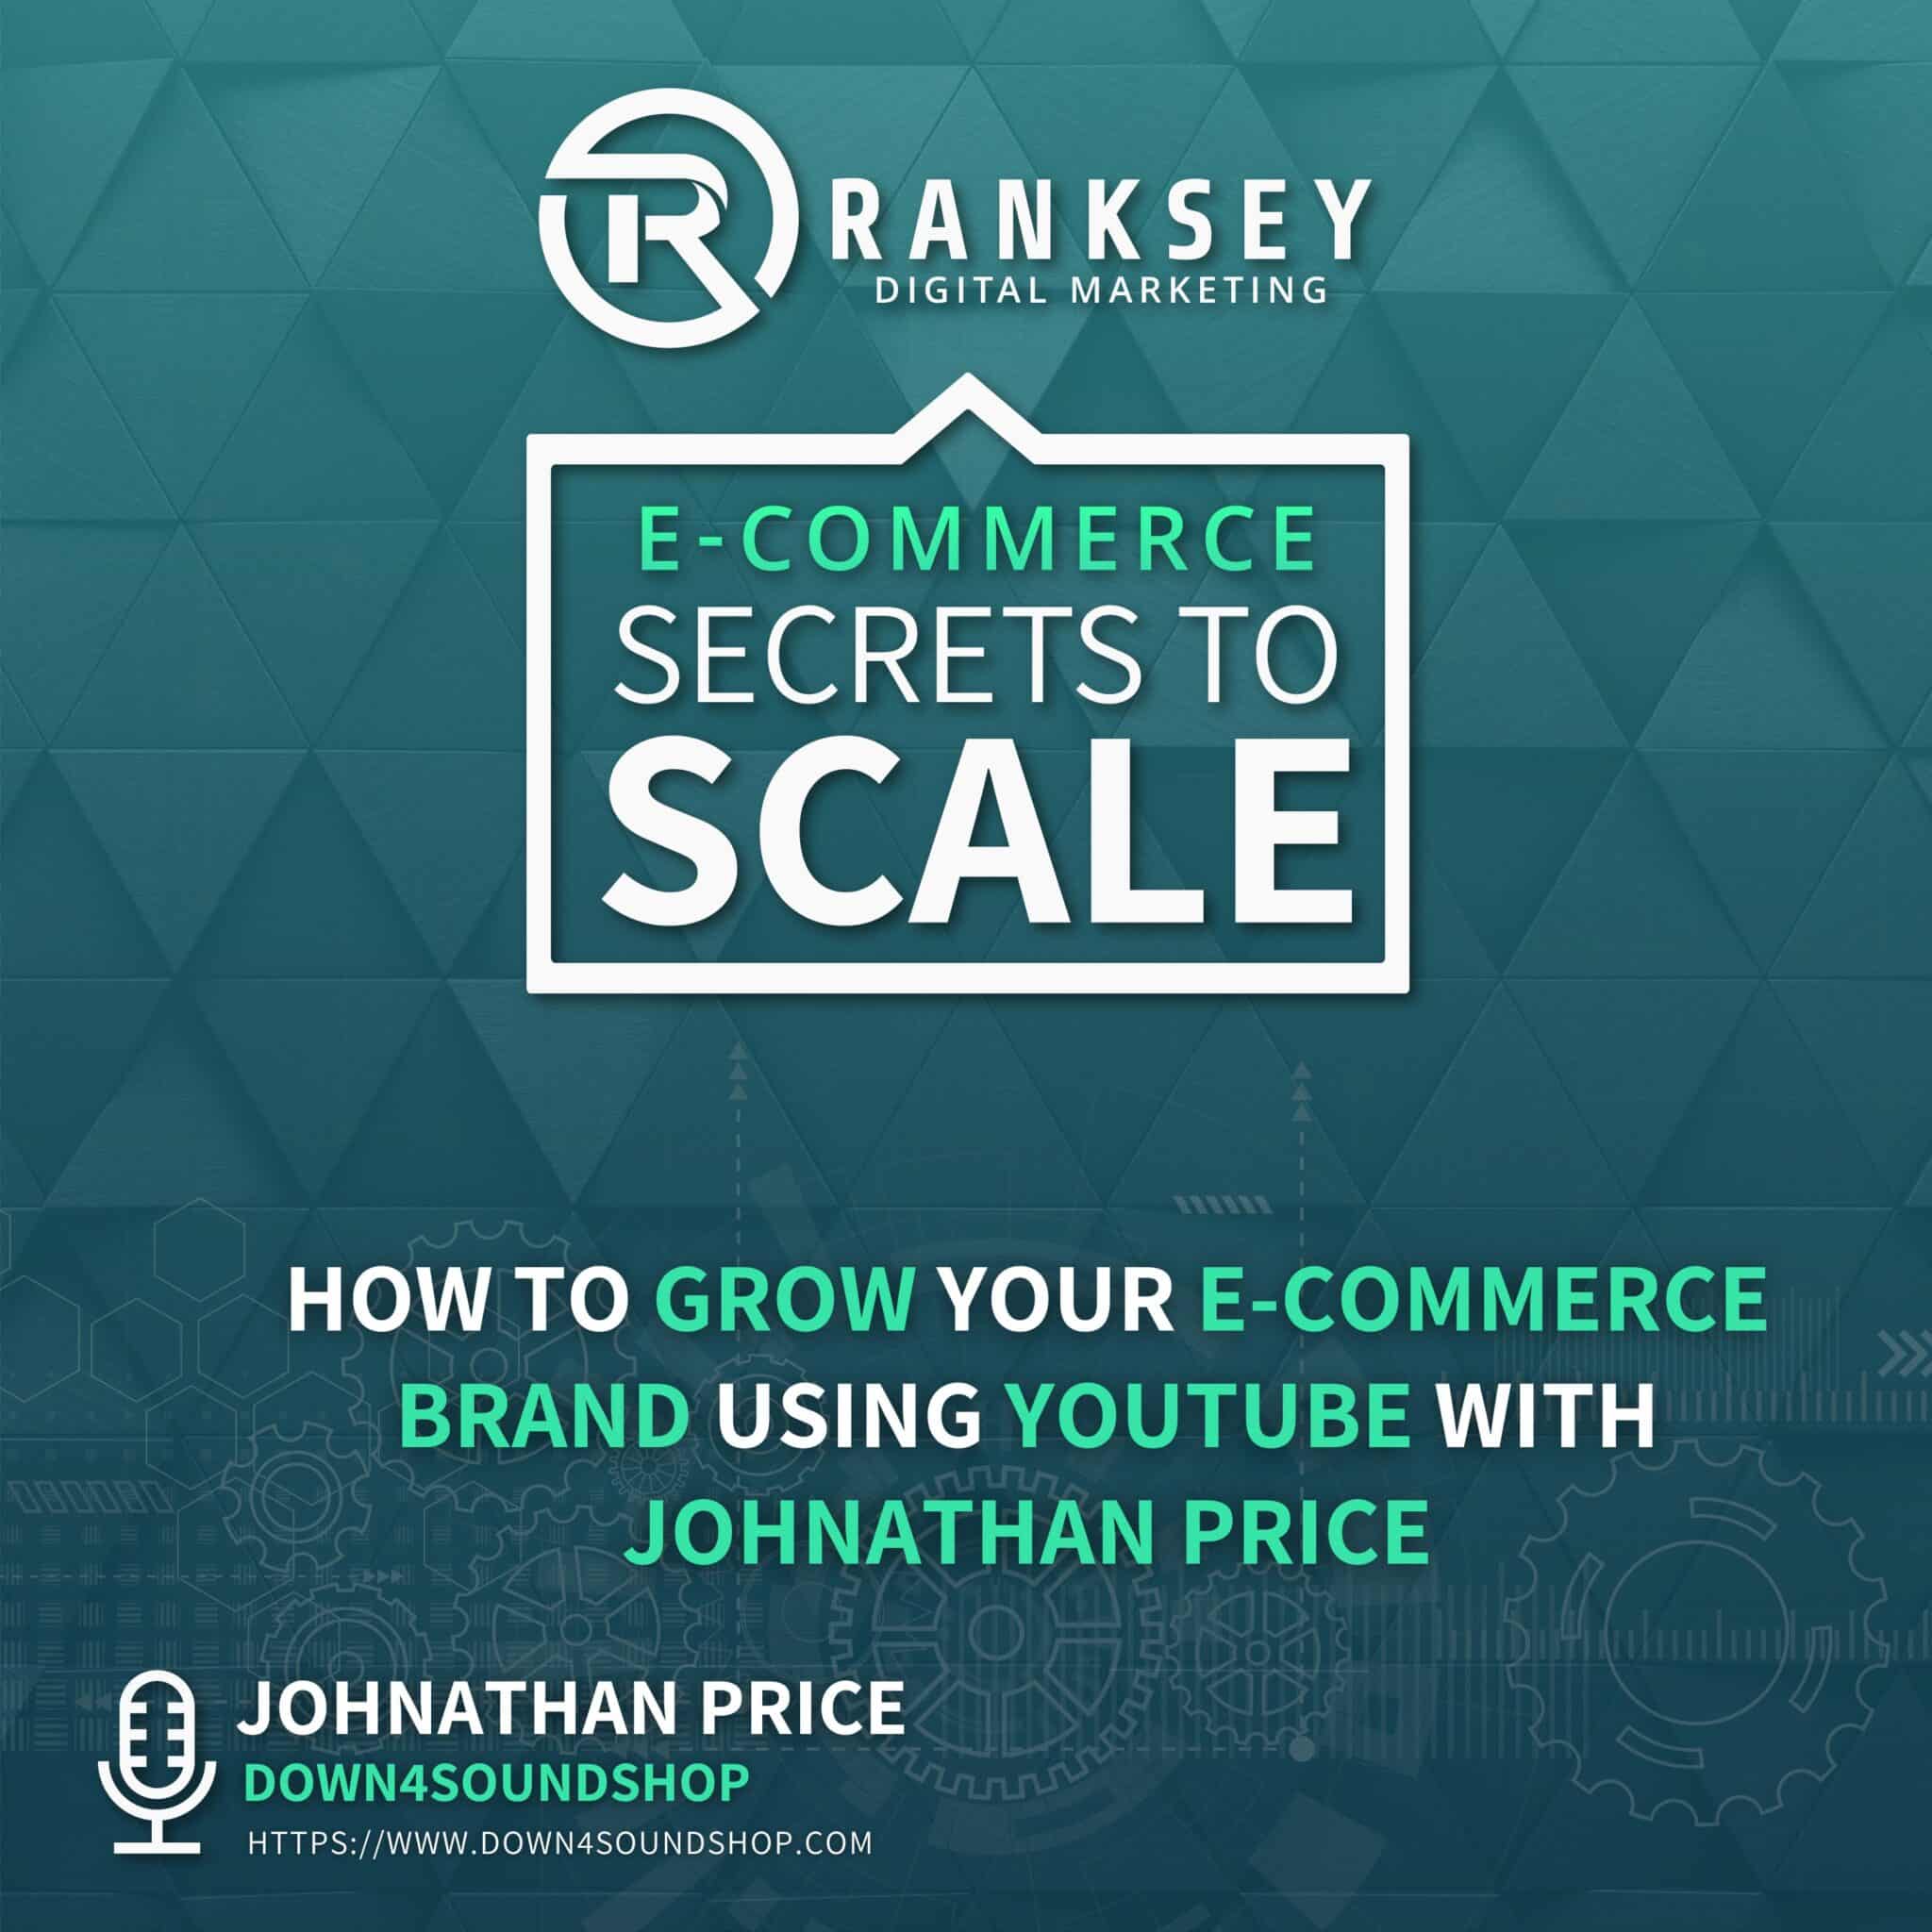 123 - How To Grow Your E-Commerce Brand Using YouTube With Johnathan Price.jpg